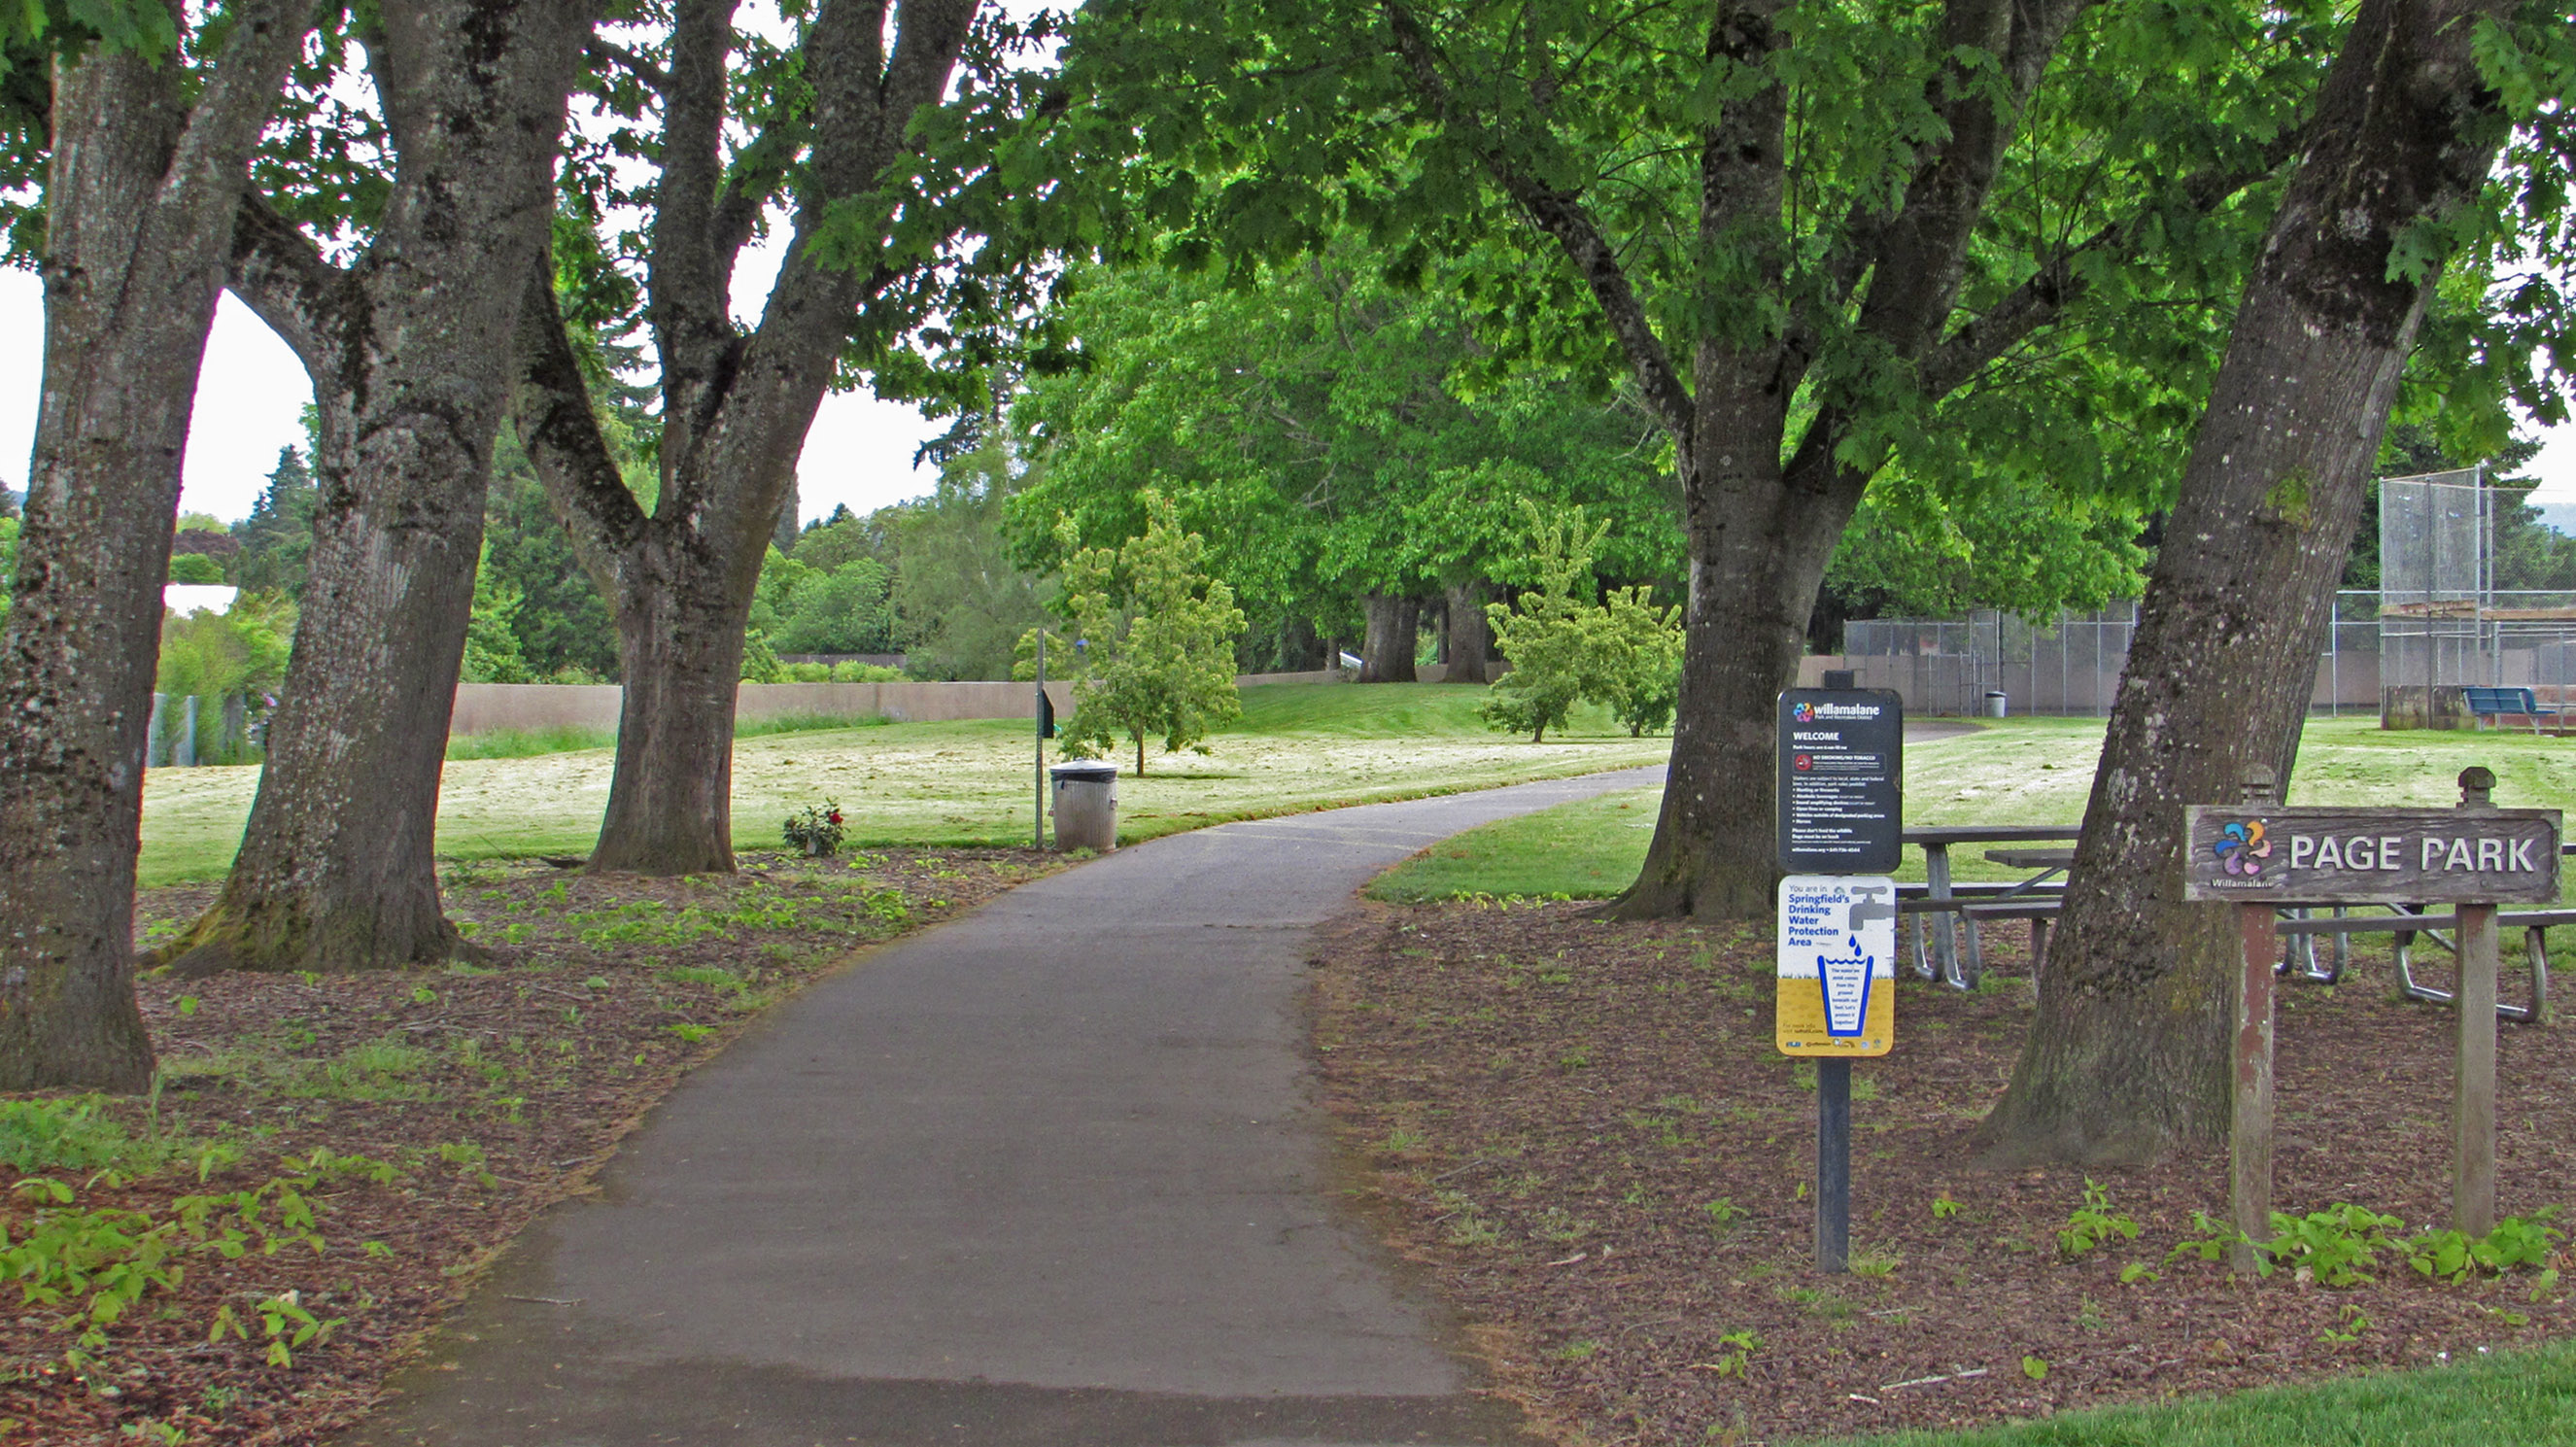 A path between trees leads to a tennis court at Page Park